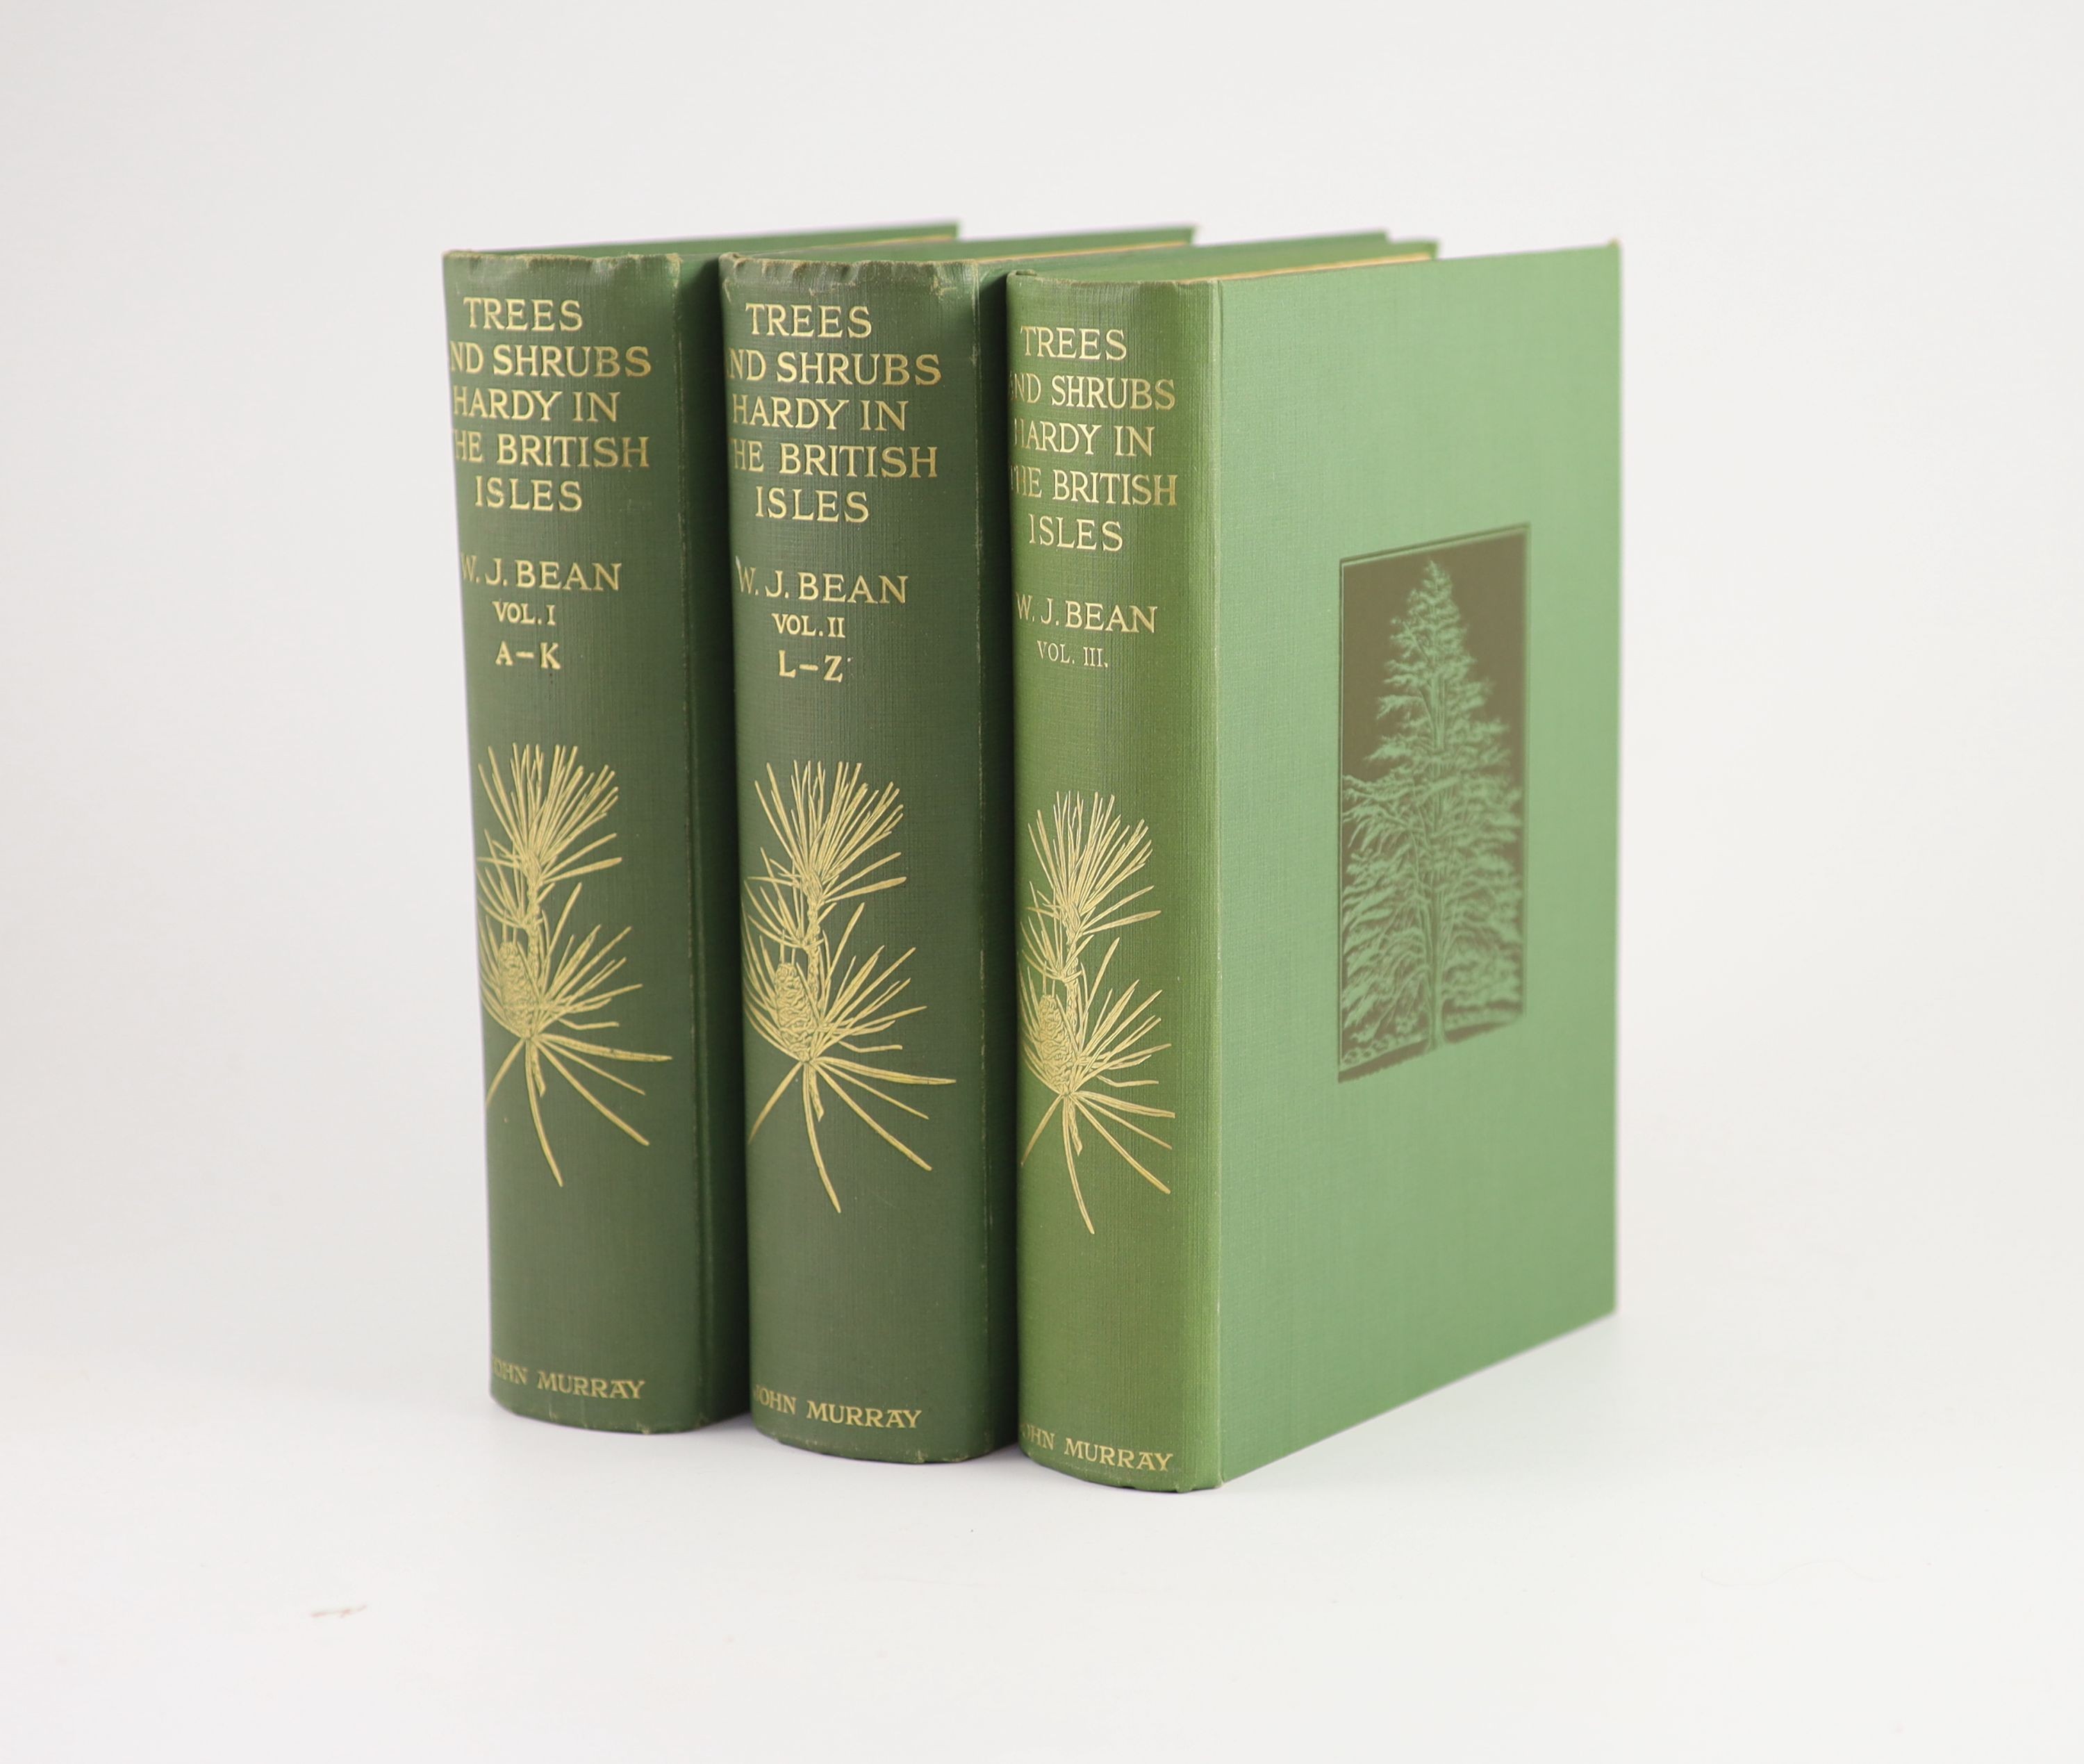 Bean. W.J - Trees and Shrubs Hardy in the British Isles, 3 vols, 4th edition, 8vo, green pictorial cloth, London, 1925